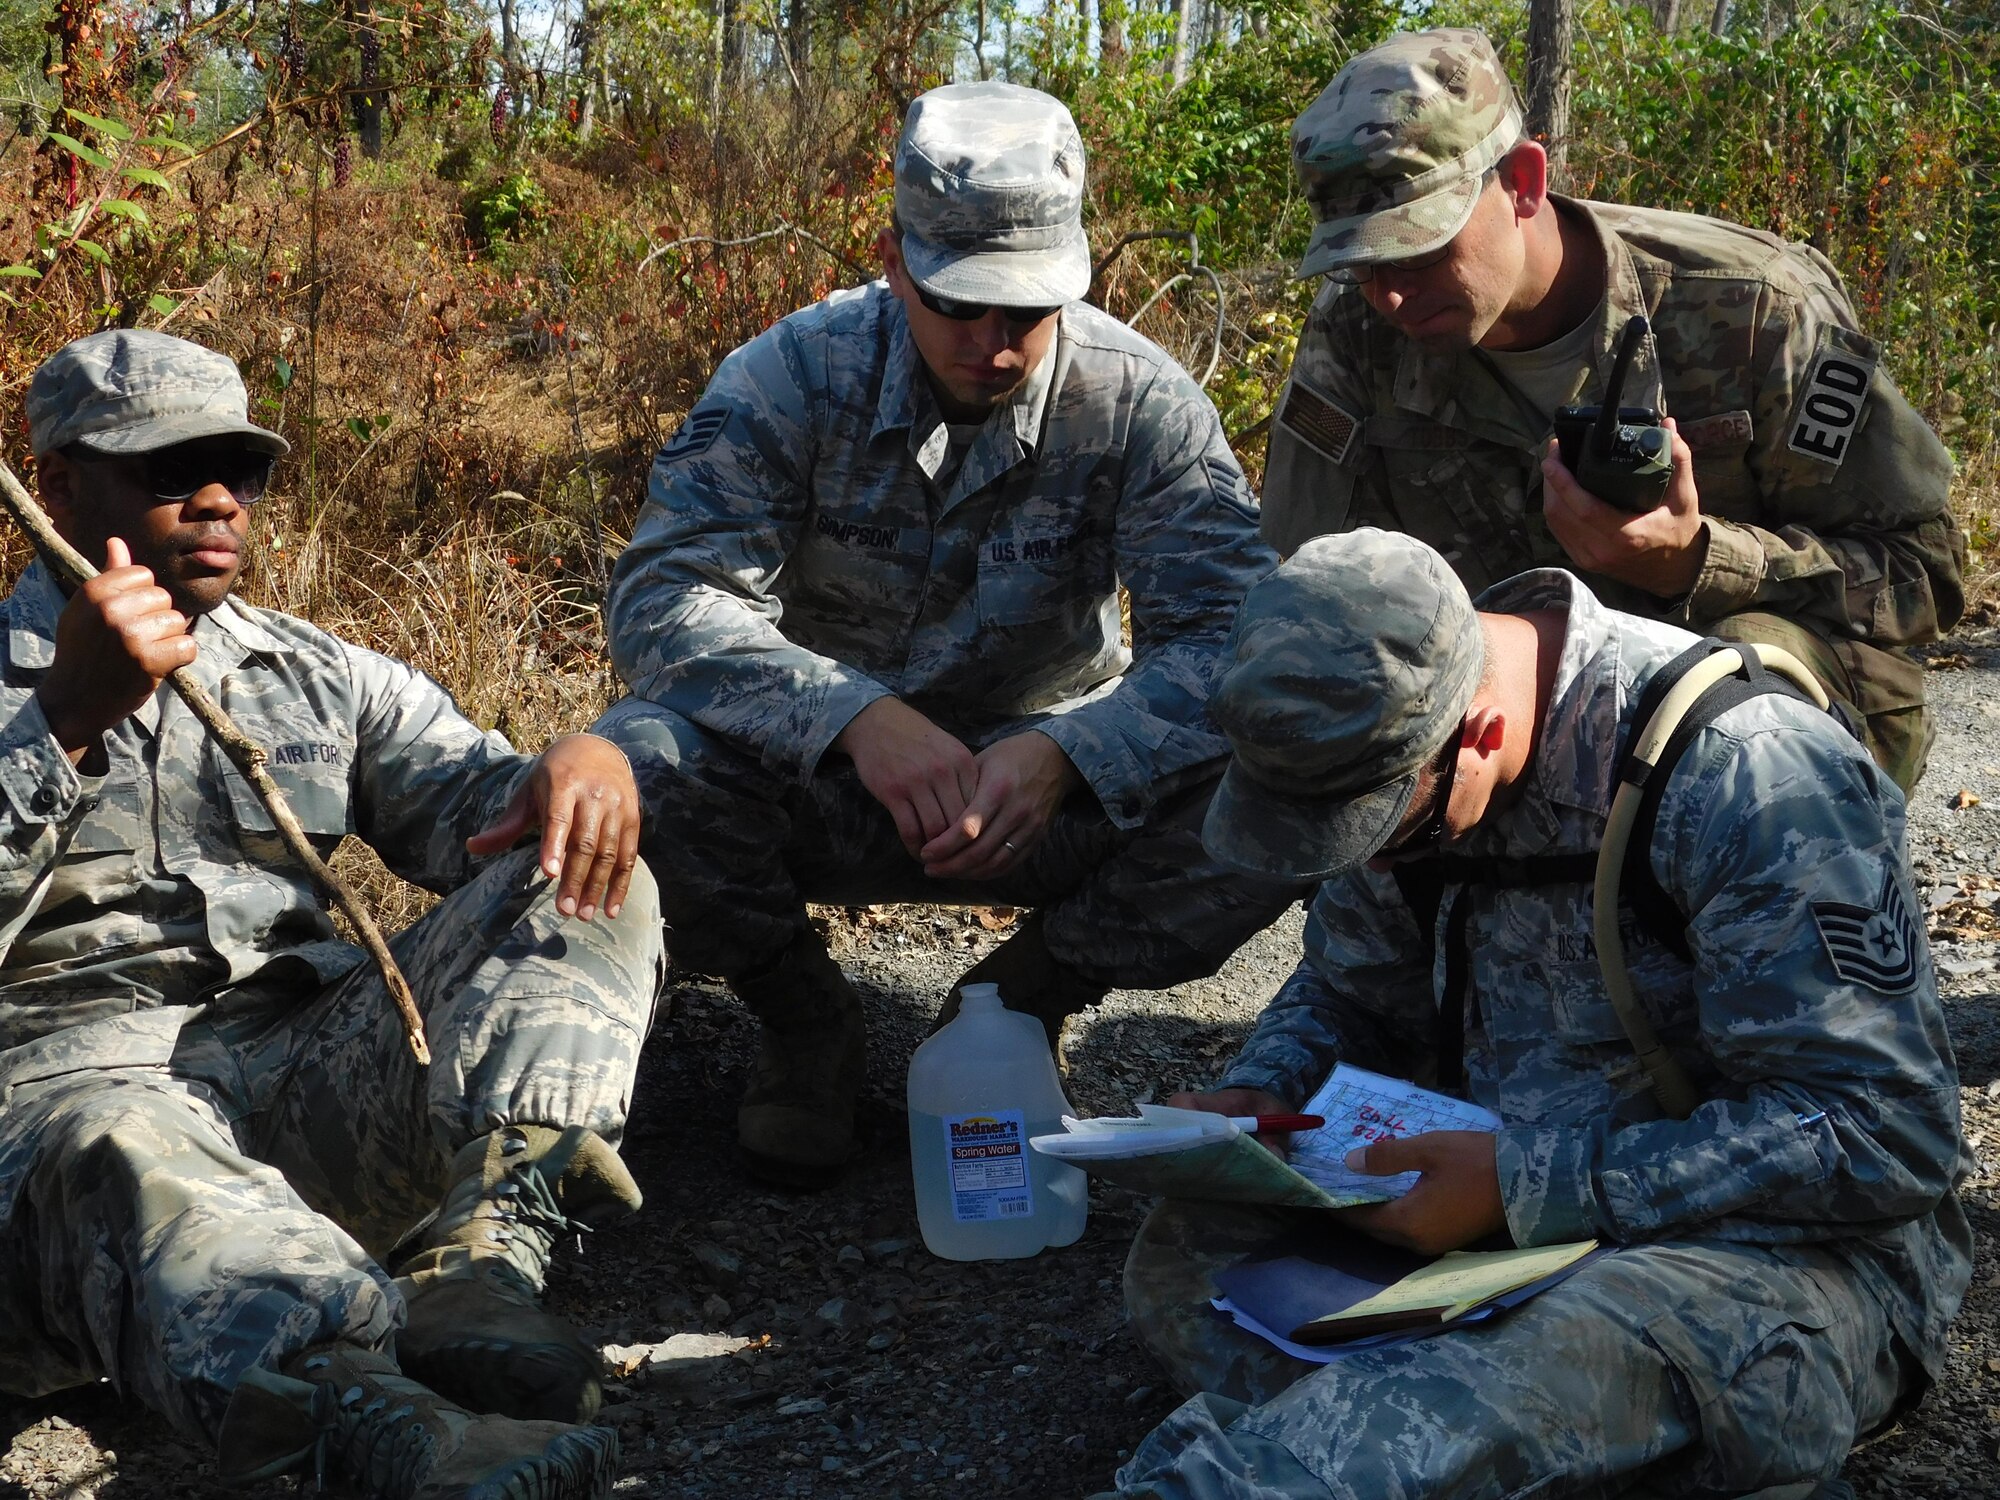 Airmen assigned to the 436th Civil Engineer Squadron practice land navigation skills Sept. 21, 2017, during a field training exercise at Fort Indiantown Gap, Pa. These skills can be used to survive and operate in remote locations around the world. (Courtesy photo)